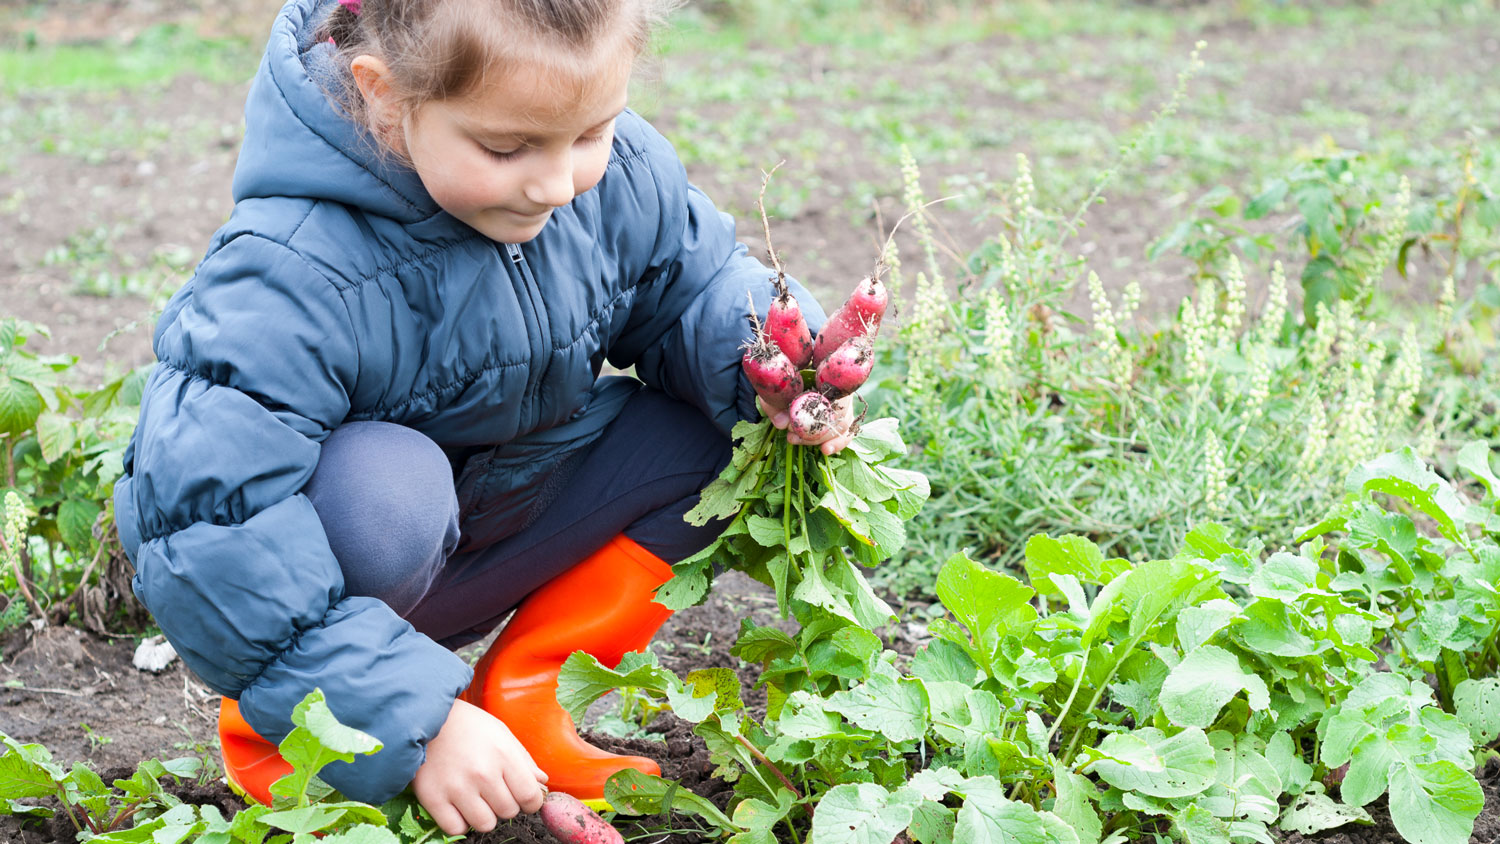 A young girl picking radishes from a garden